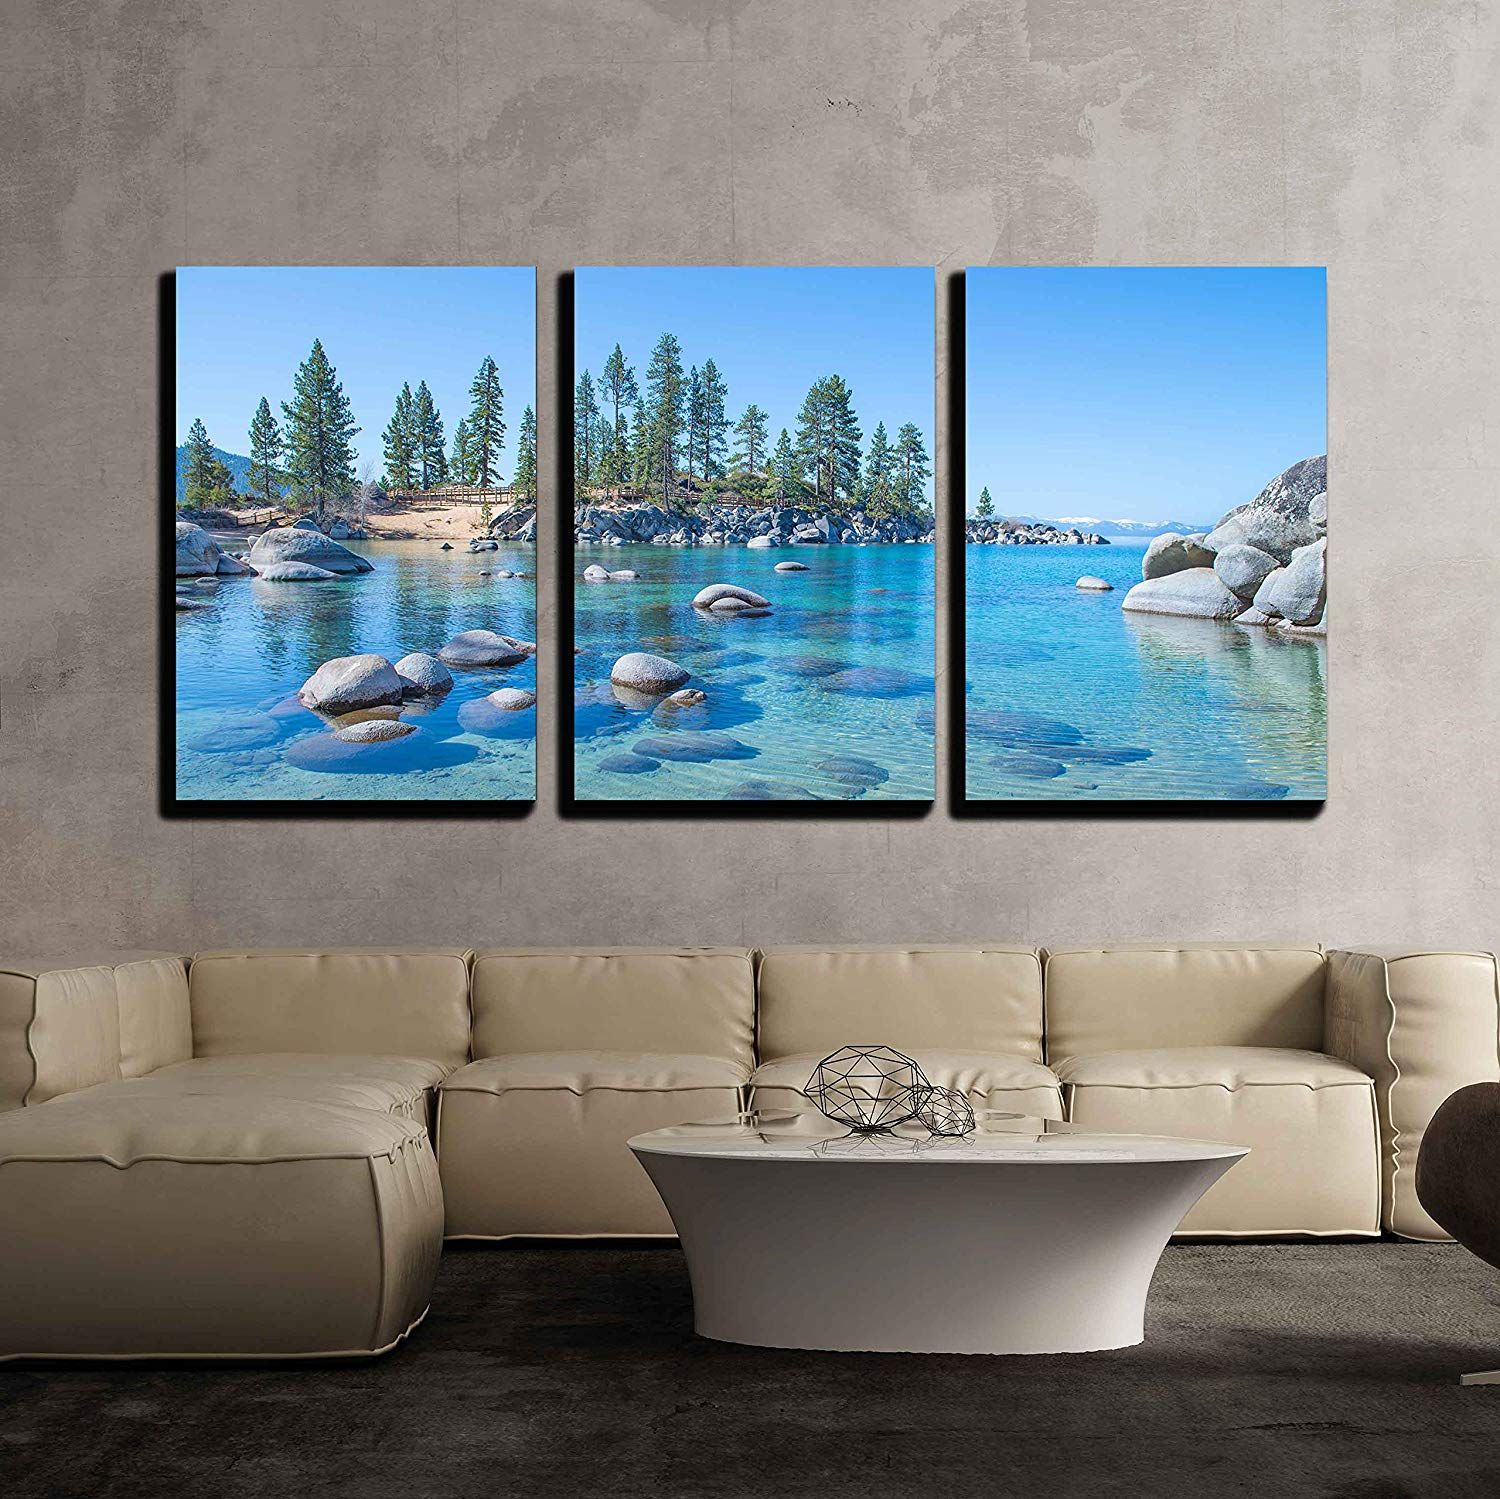 Wall26 – 3 Piece Canvas Wall Art – Beautiful Blue Clear Water On The In Latest Blue Morpho Wall Art (View 4 of 20)